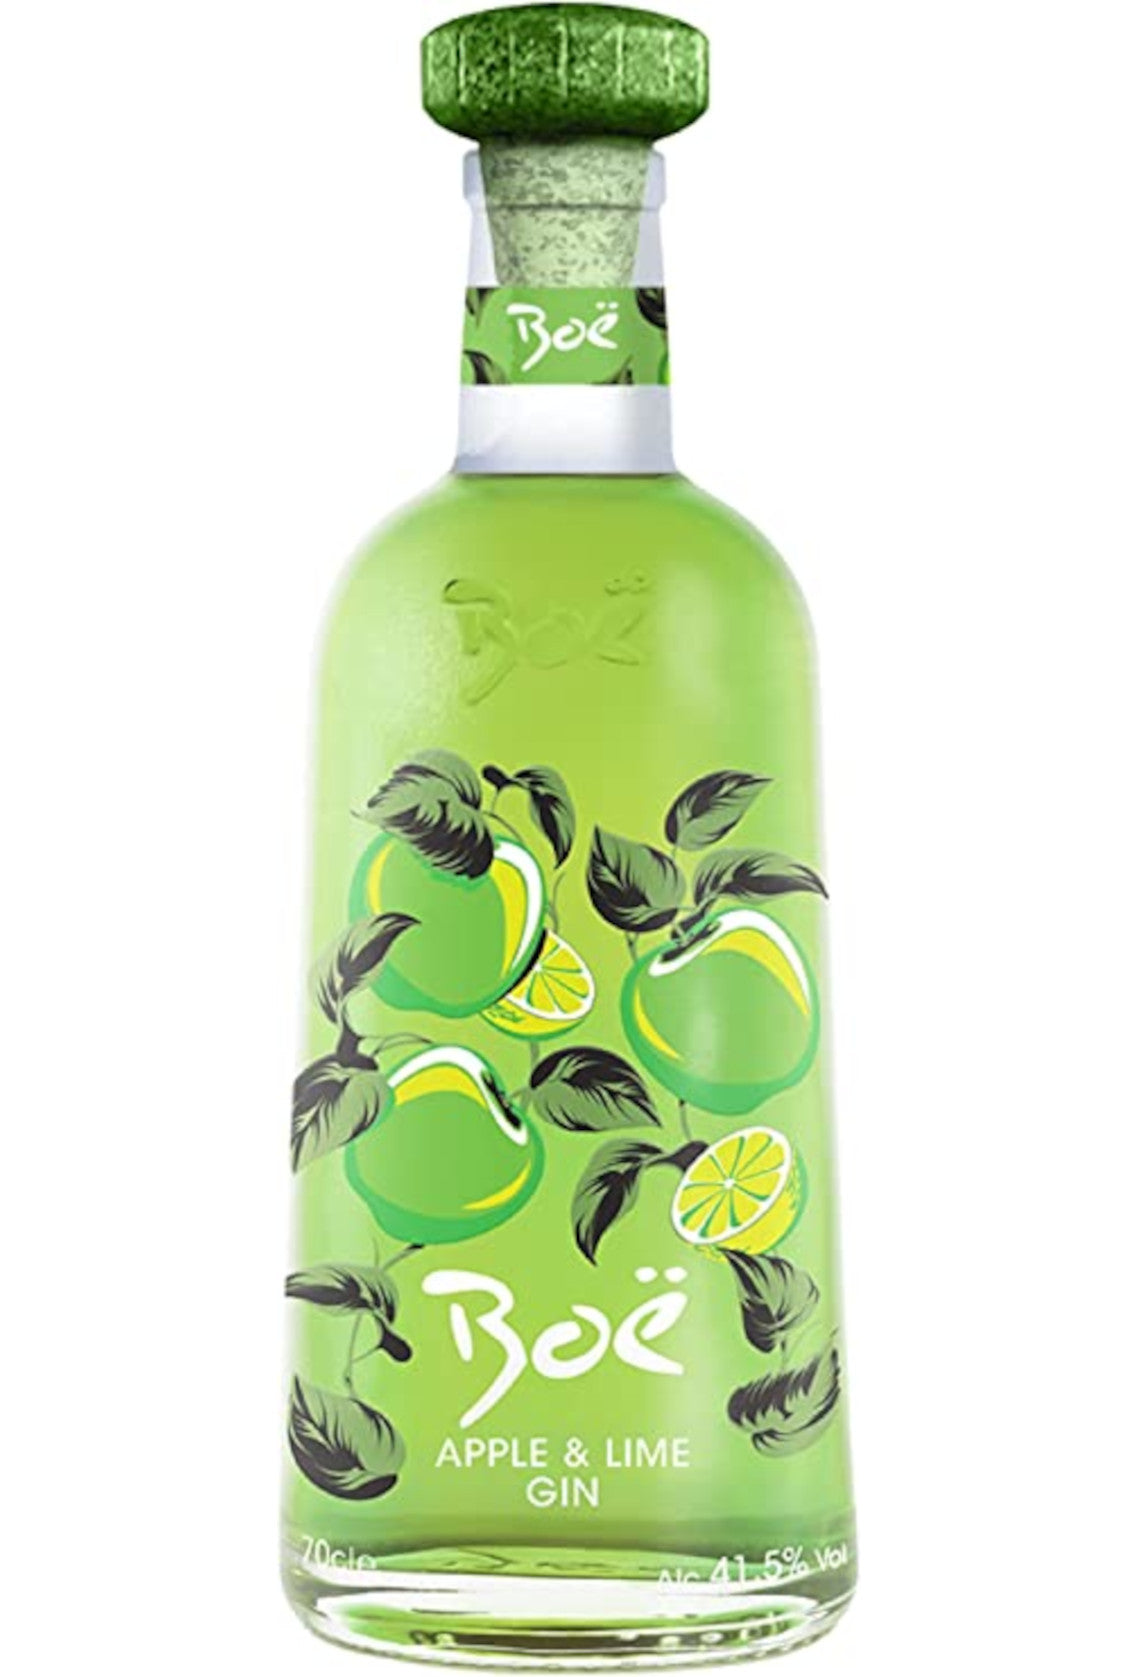 BOË APPLE AND LIME GIN, Gin, 70cl